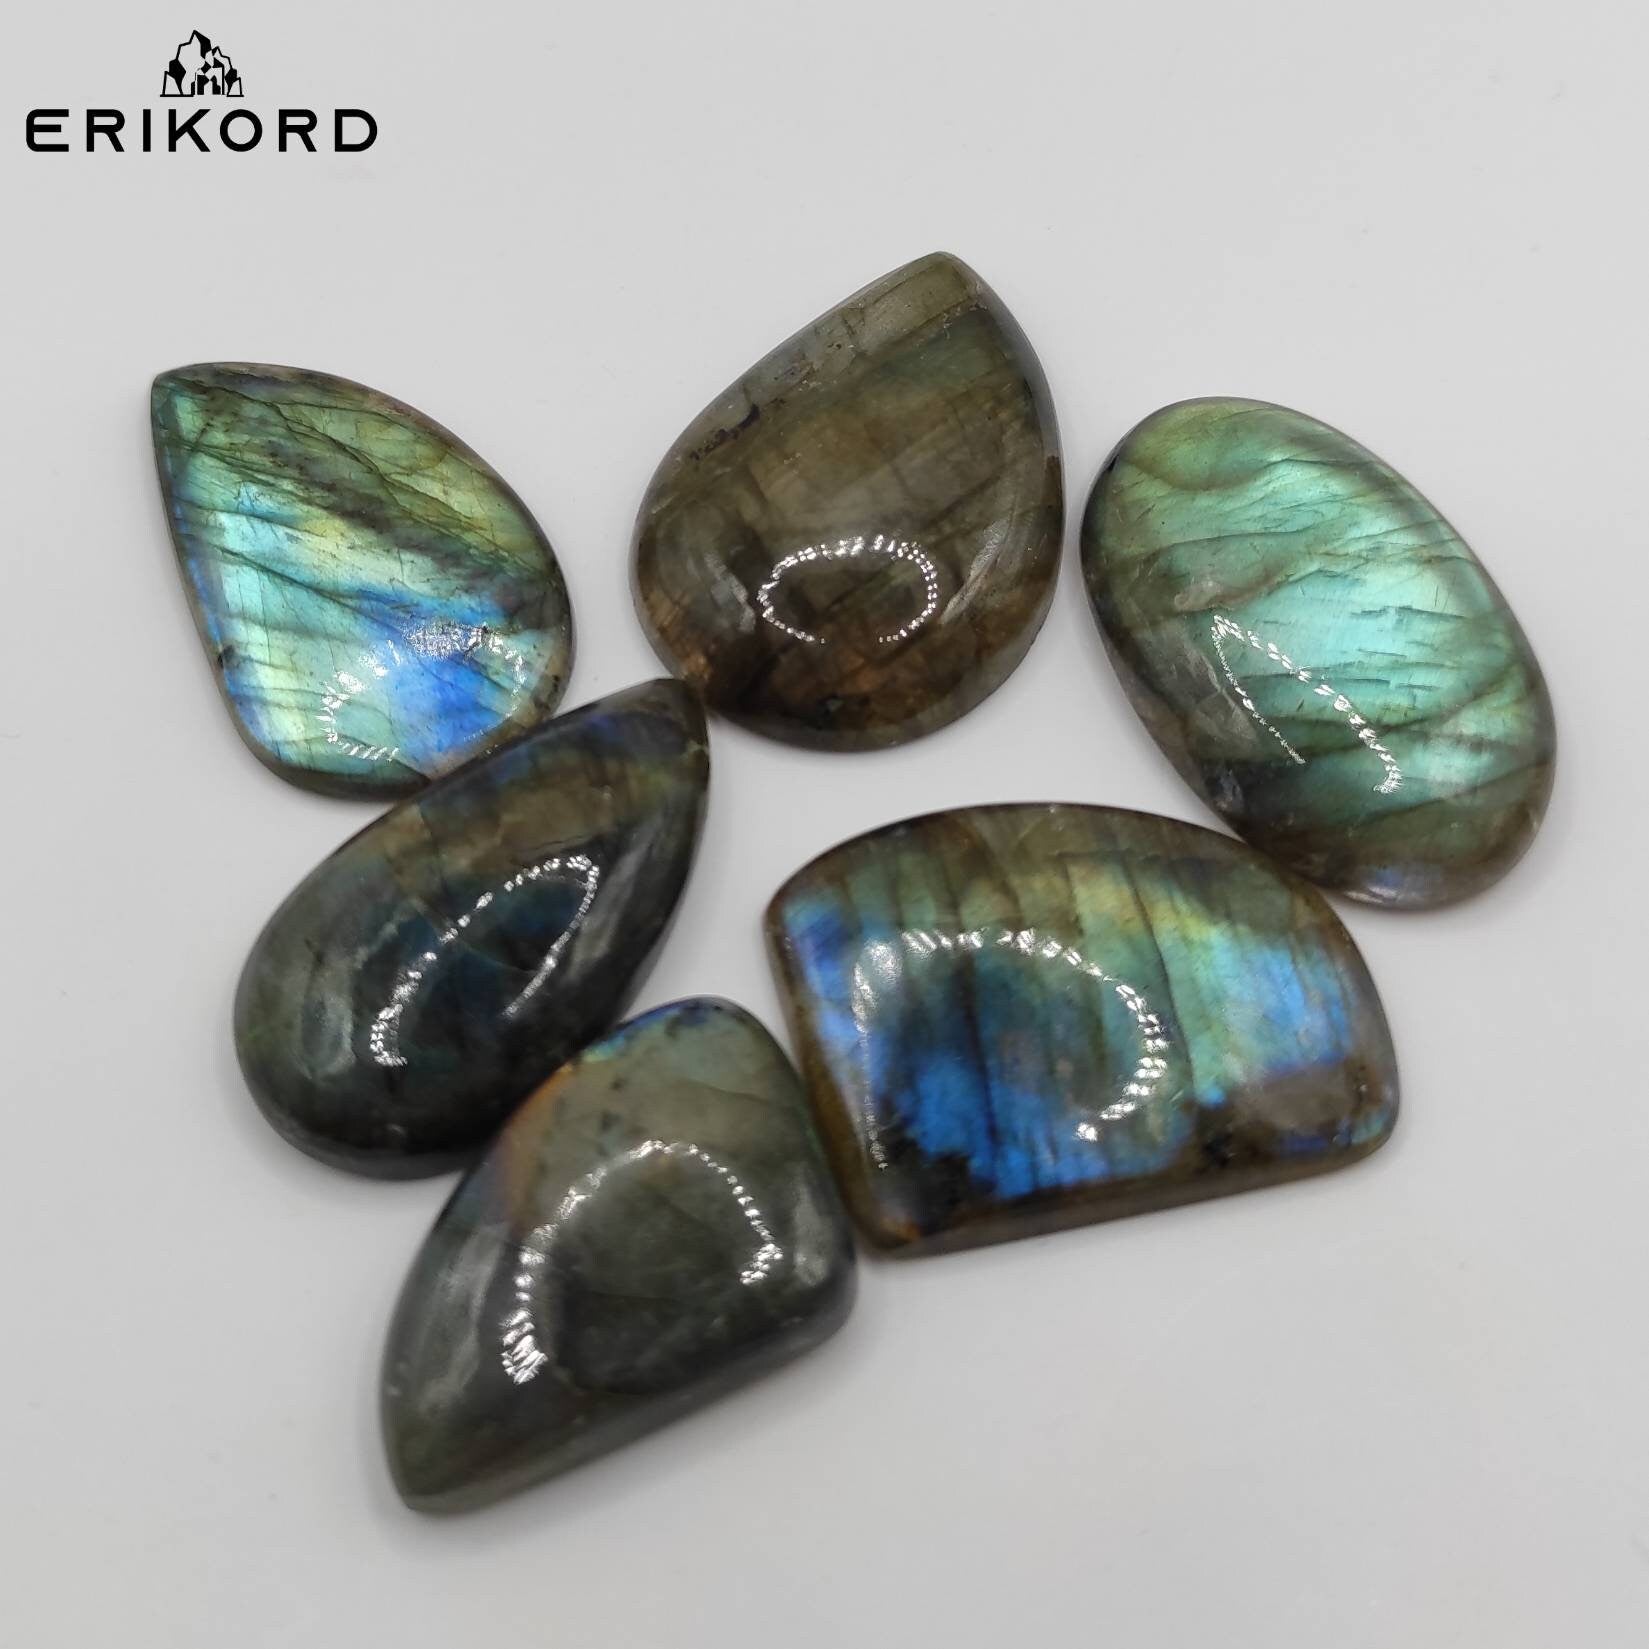 211ct 6pc Lot of Labradorite Cabochons Natural Flashy Labradorite Cabs Oval Cabochon Mixed Shape Cabochon Lot for Jewelry Loose Gems Pendant